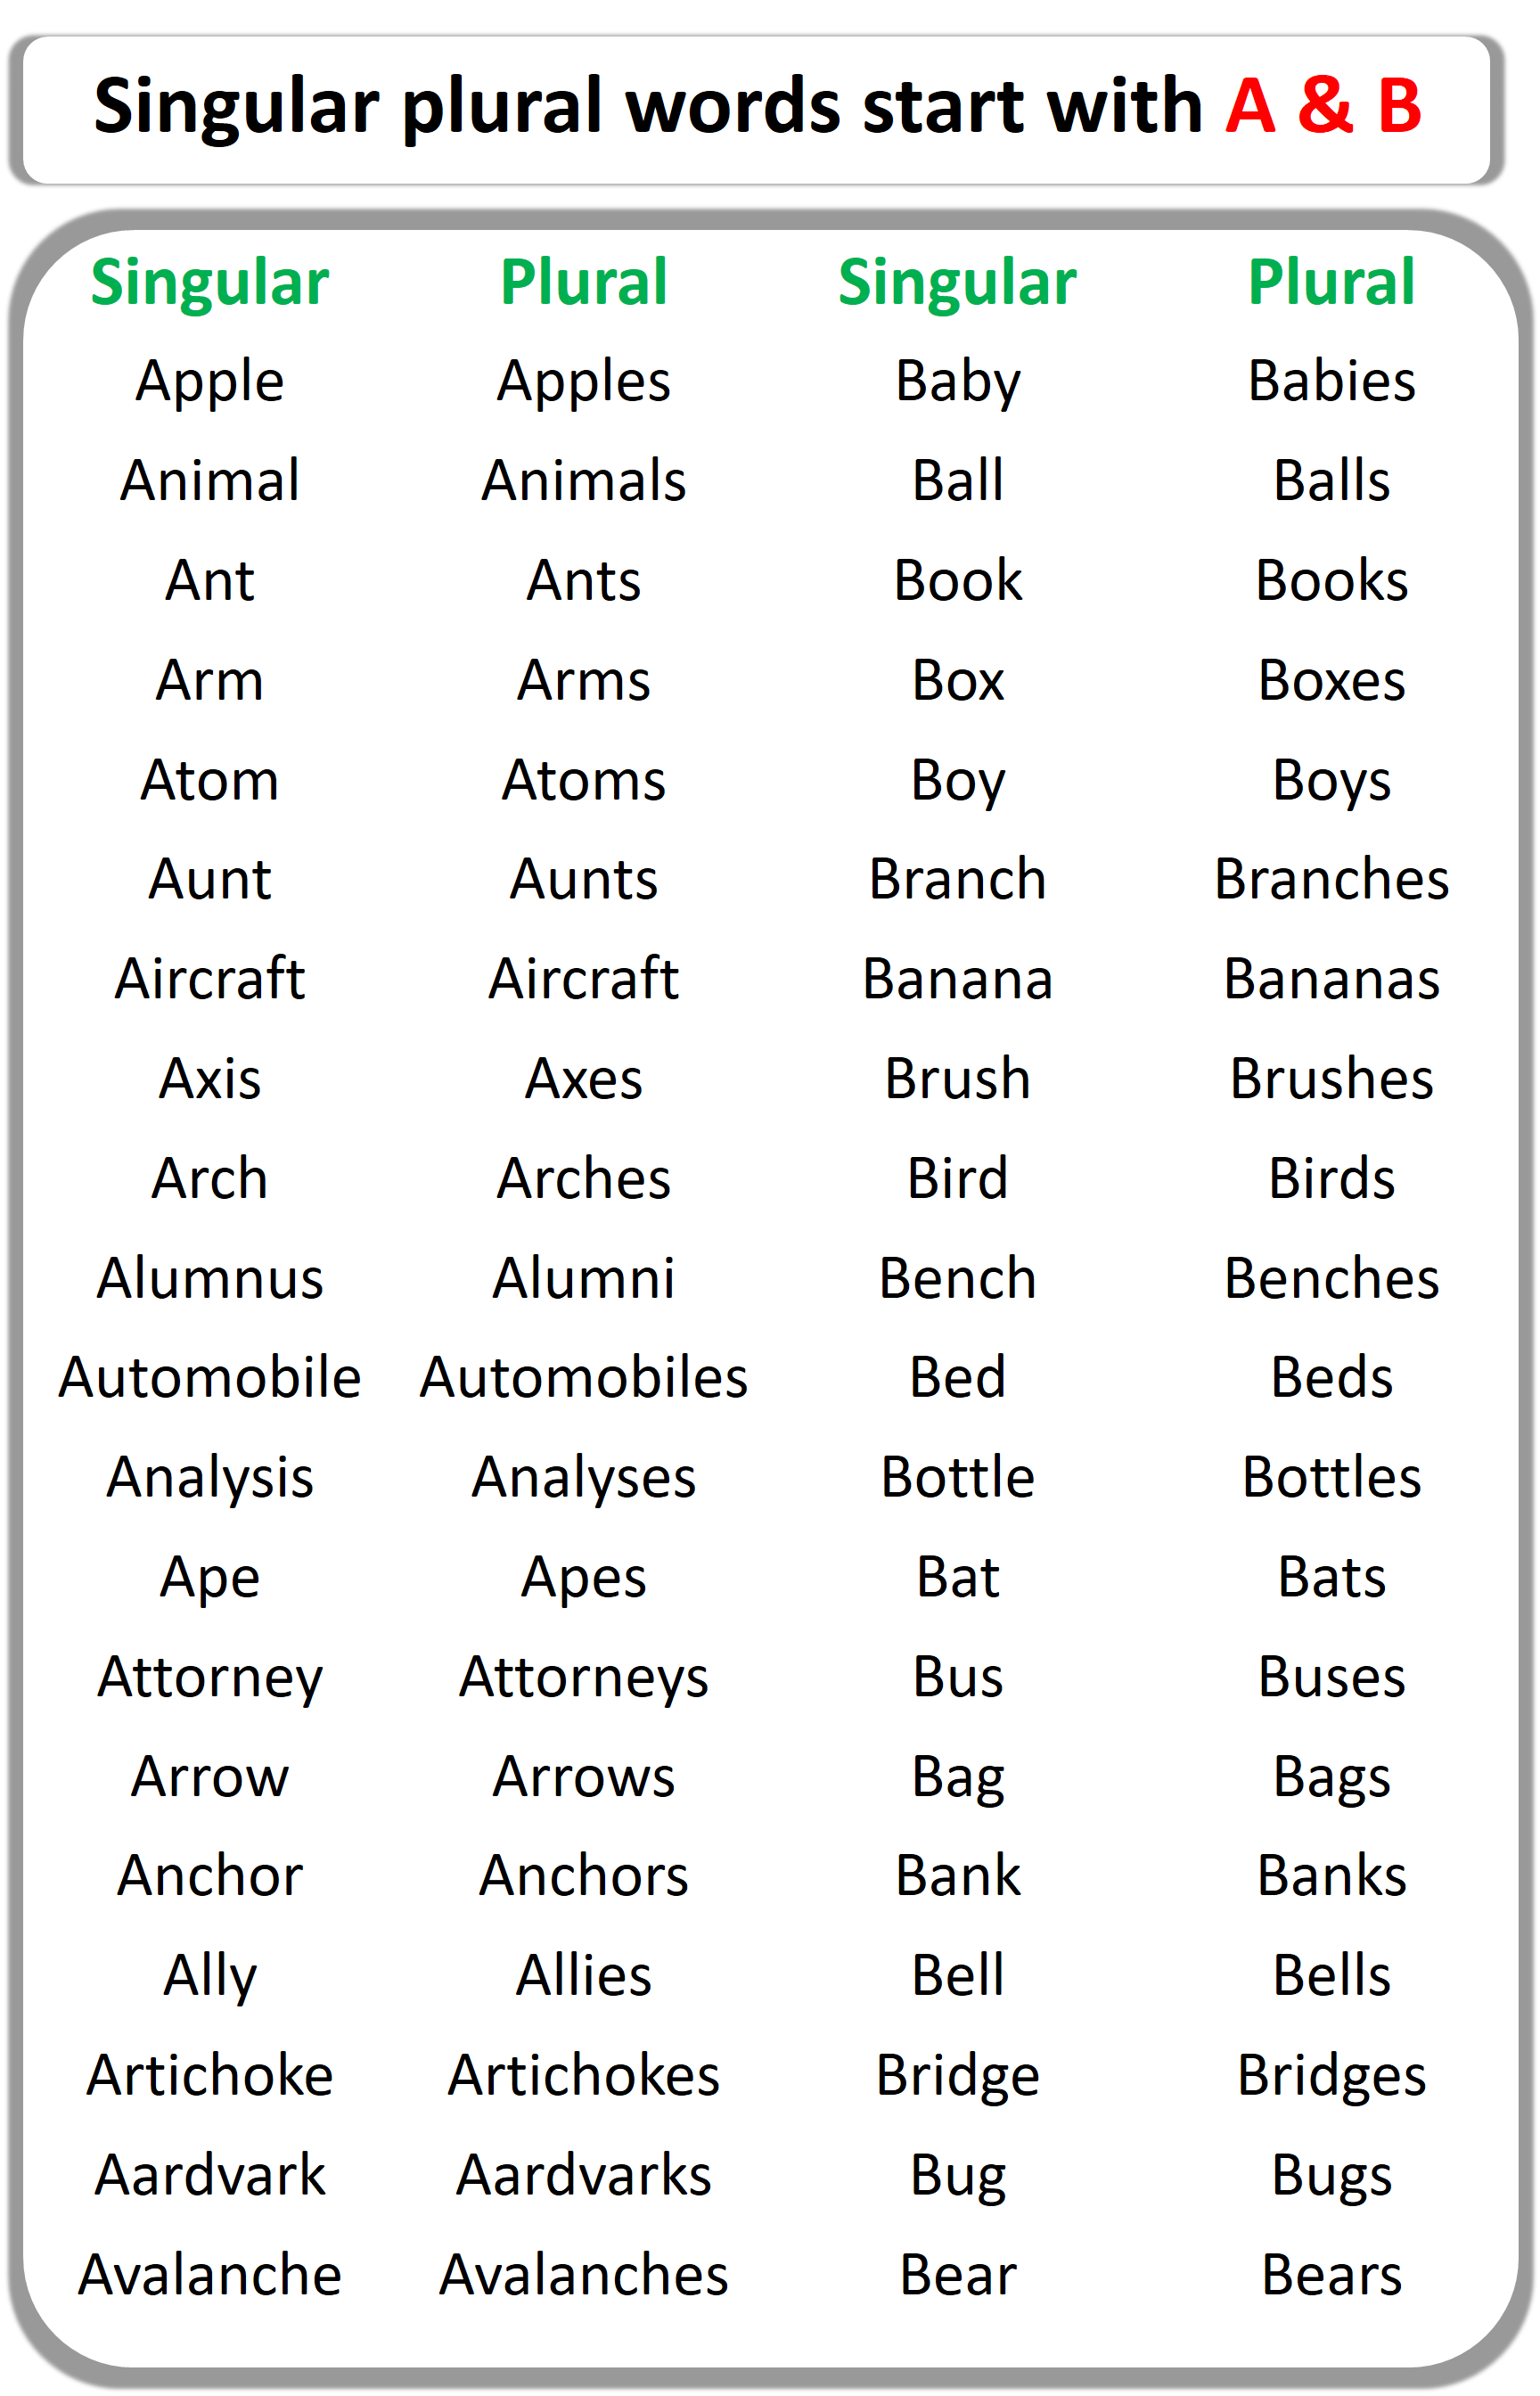 Singular Plural Words List From A to Z | A & B